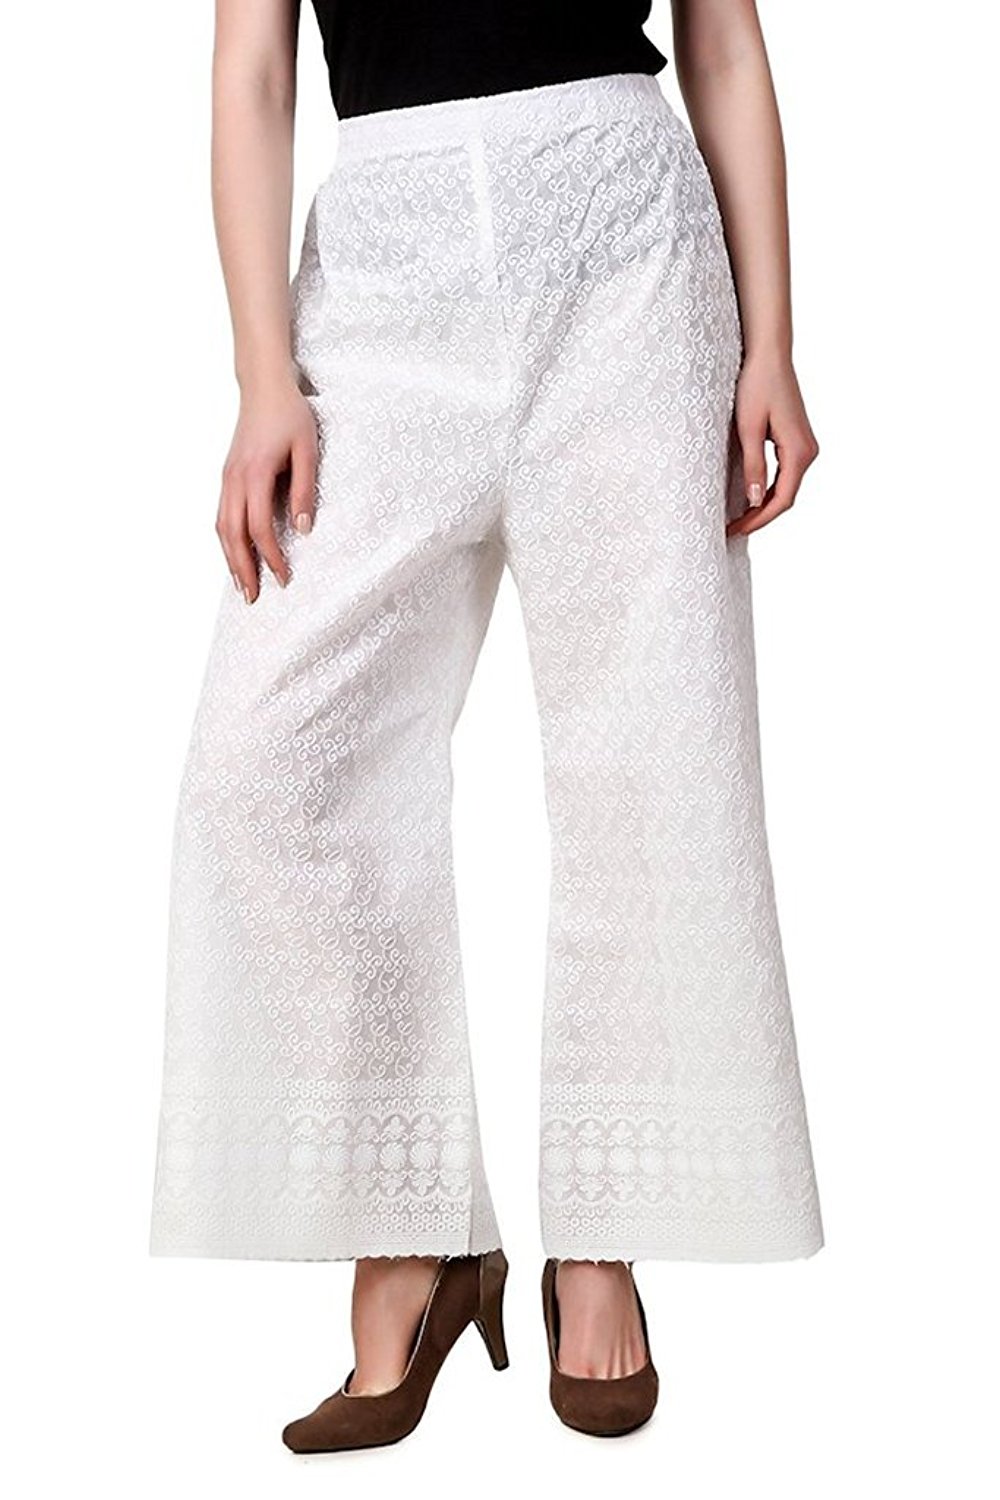 Buy Palazzo pant for women S - Cotton Palazzo - chicken embroidery ...